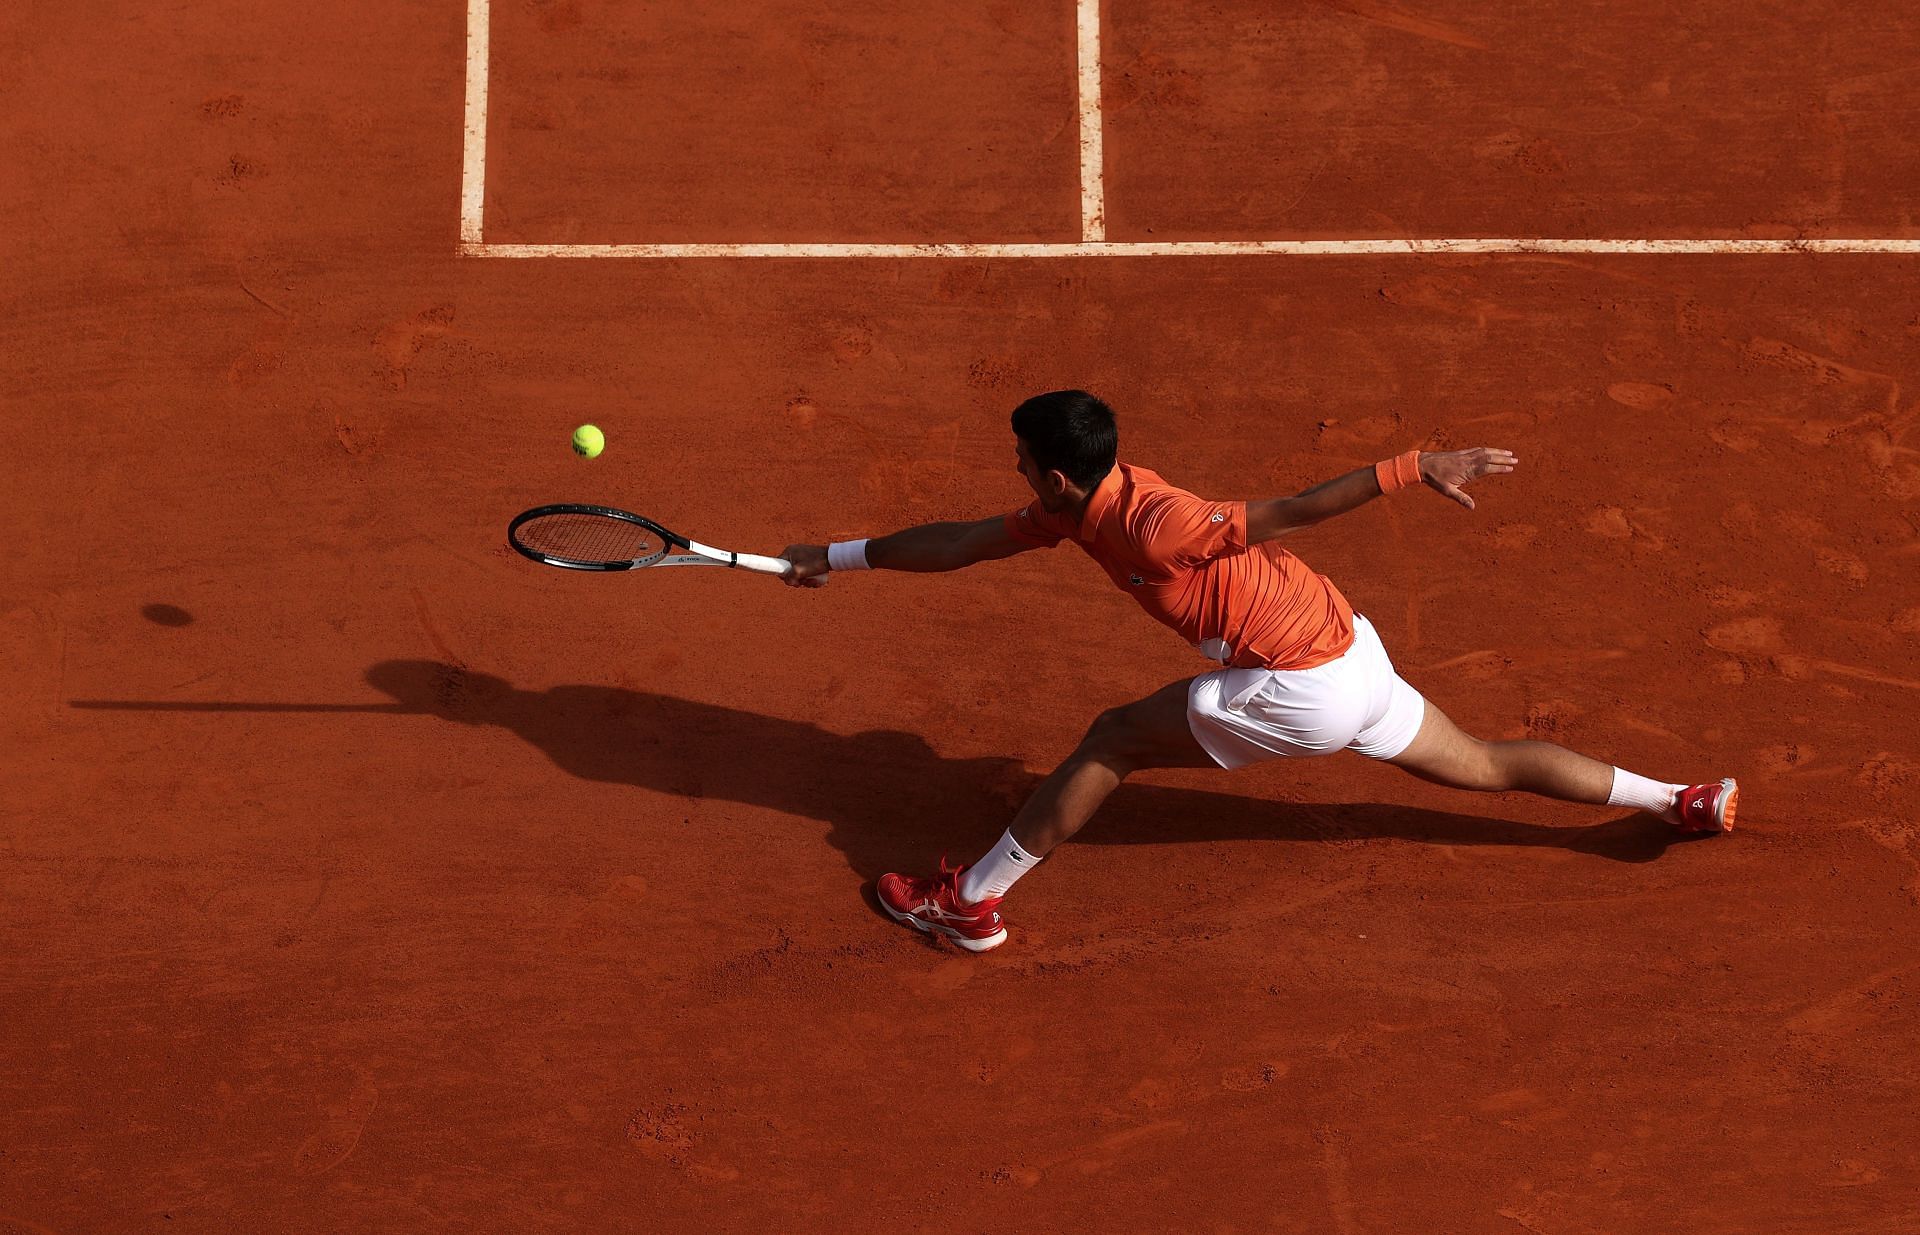 Novak Djokovic finds himself at the 160th position in the ATP Race to Turin